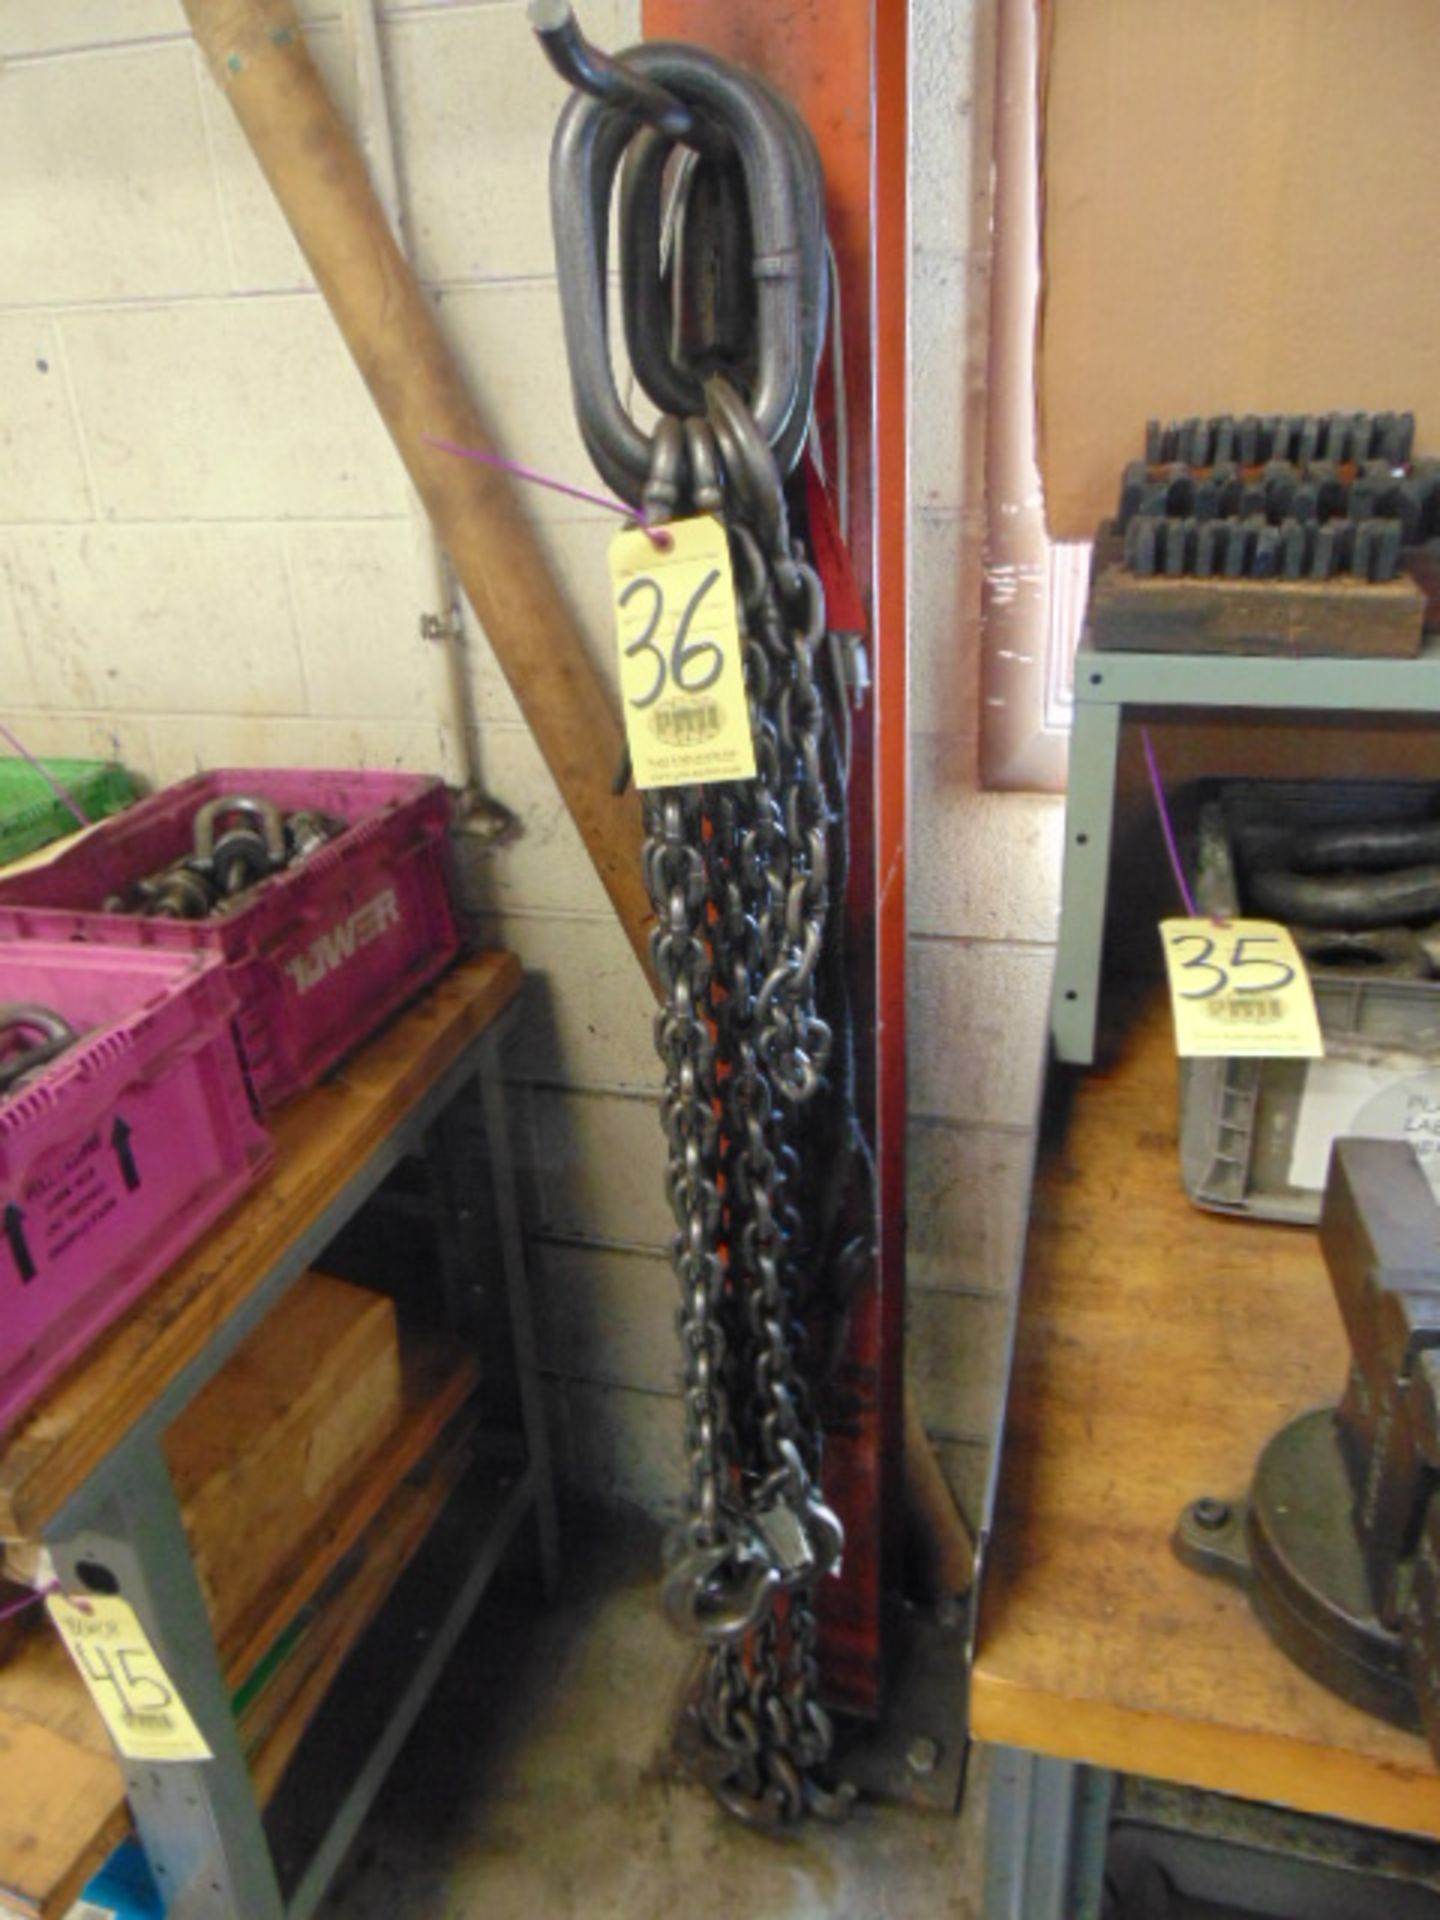 LOT CONSISTING OF: (3) lifting chains & (1) cable sling, assorted (on hook)